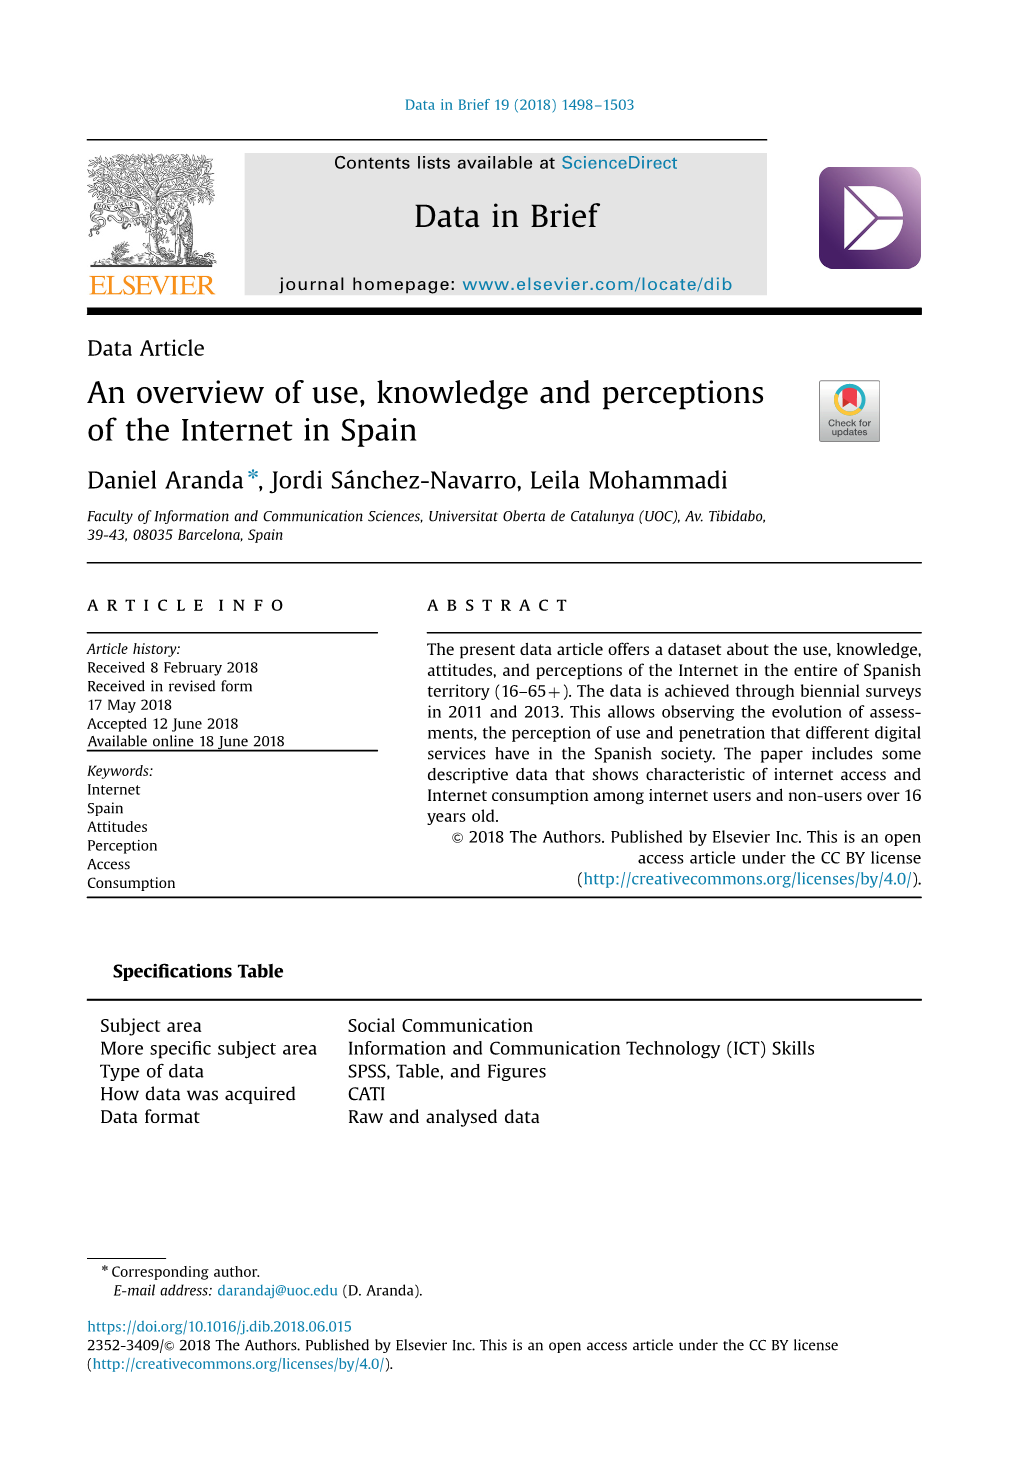 An Overview of Use, Knowledge and Perceptions of the Internet in Spain